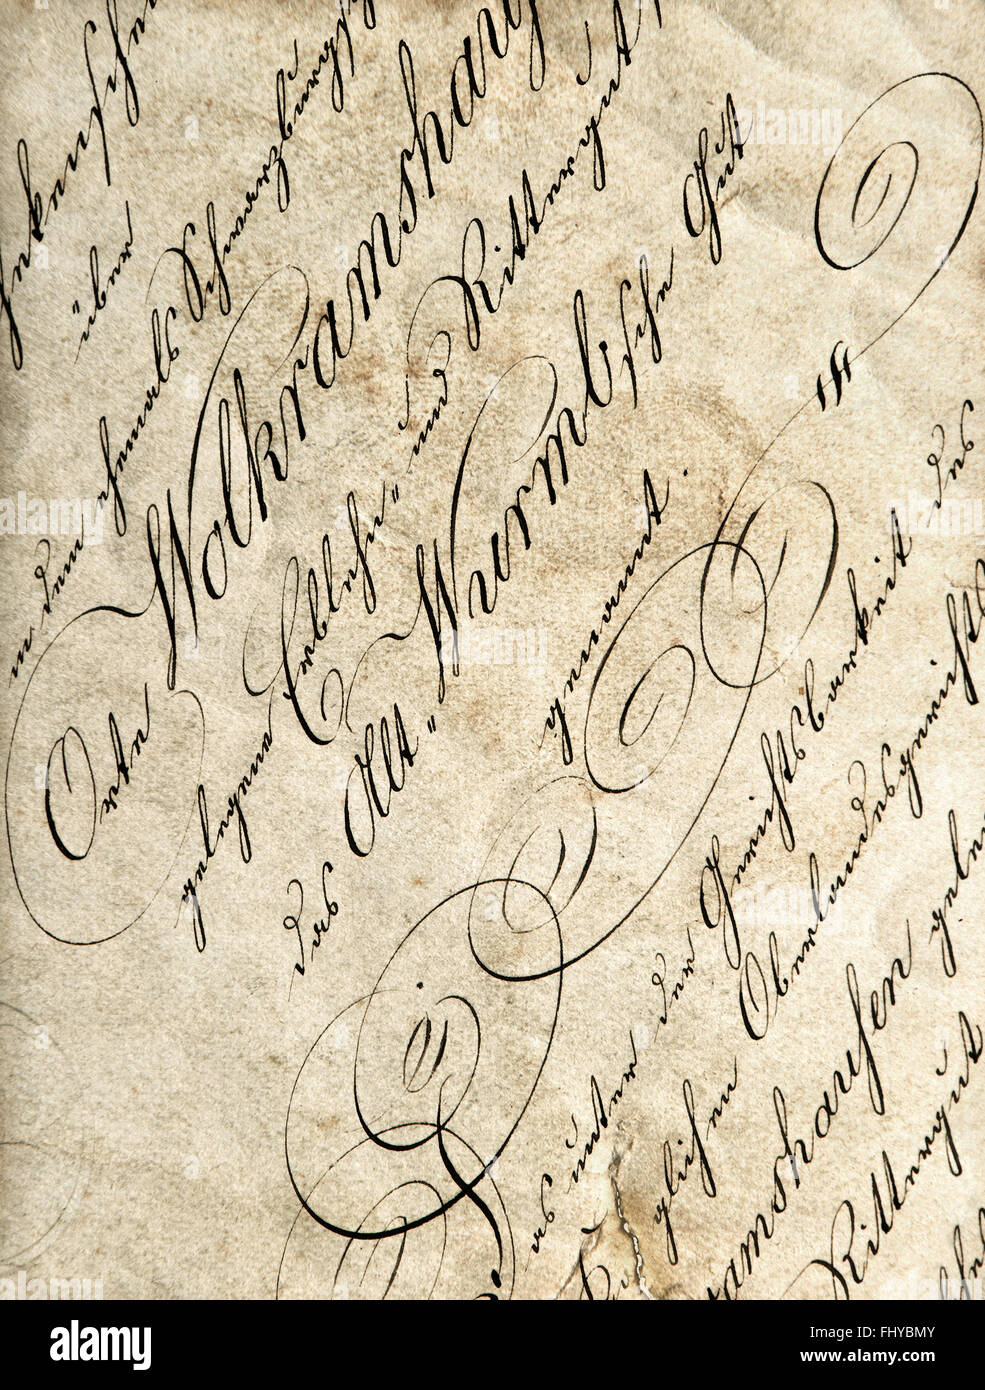 Antique calligraphy. Grungy worn paper texture Stock Photo